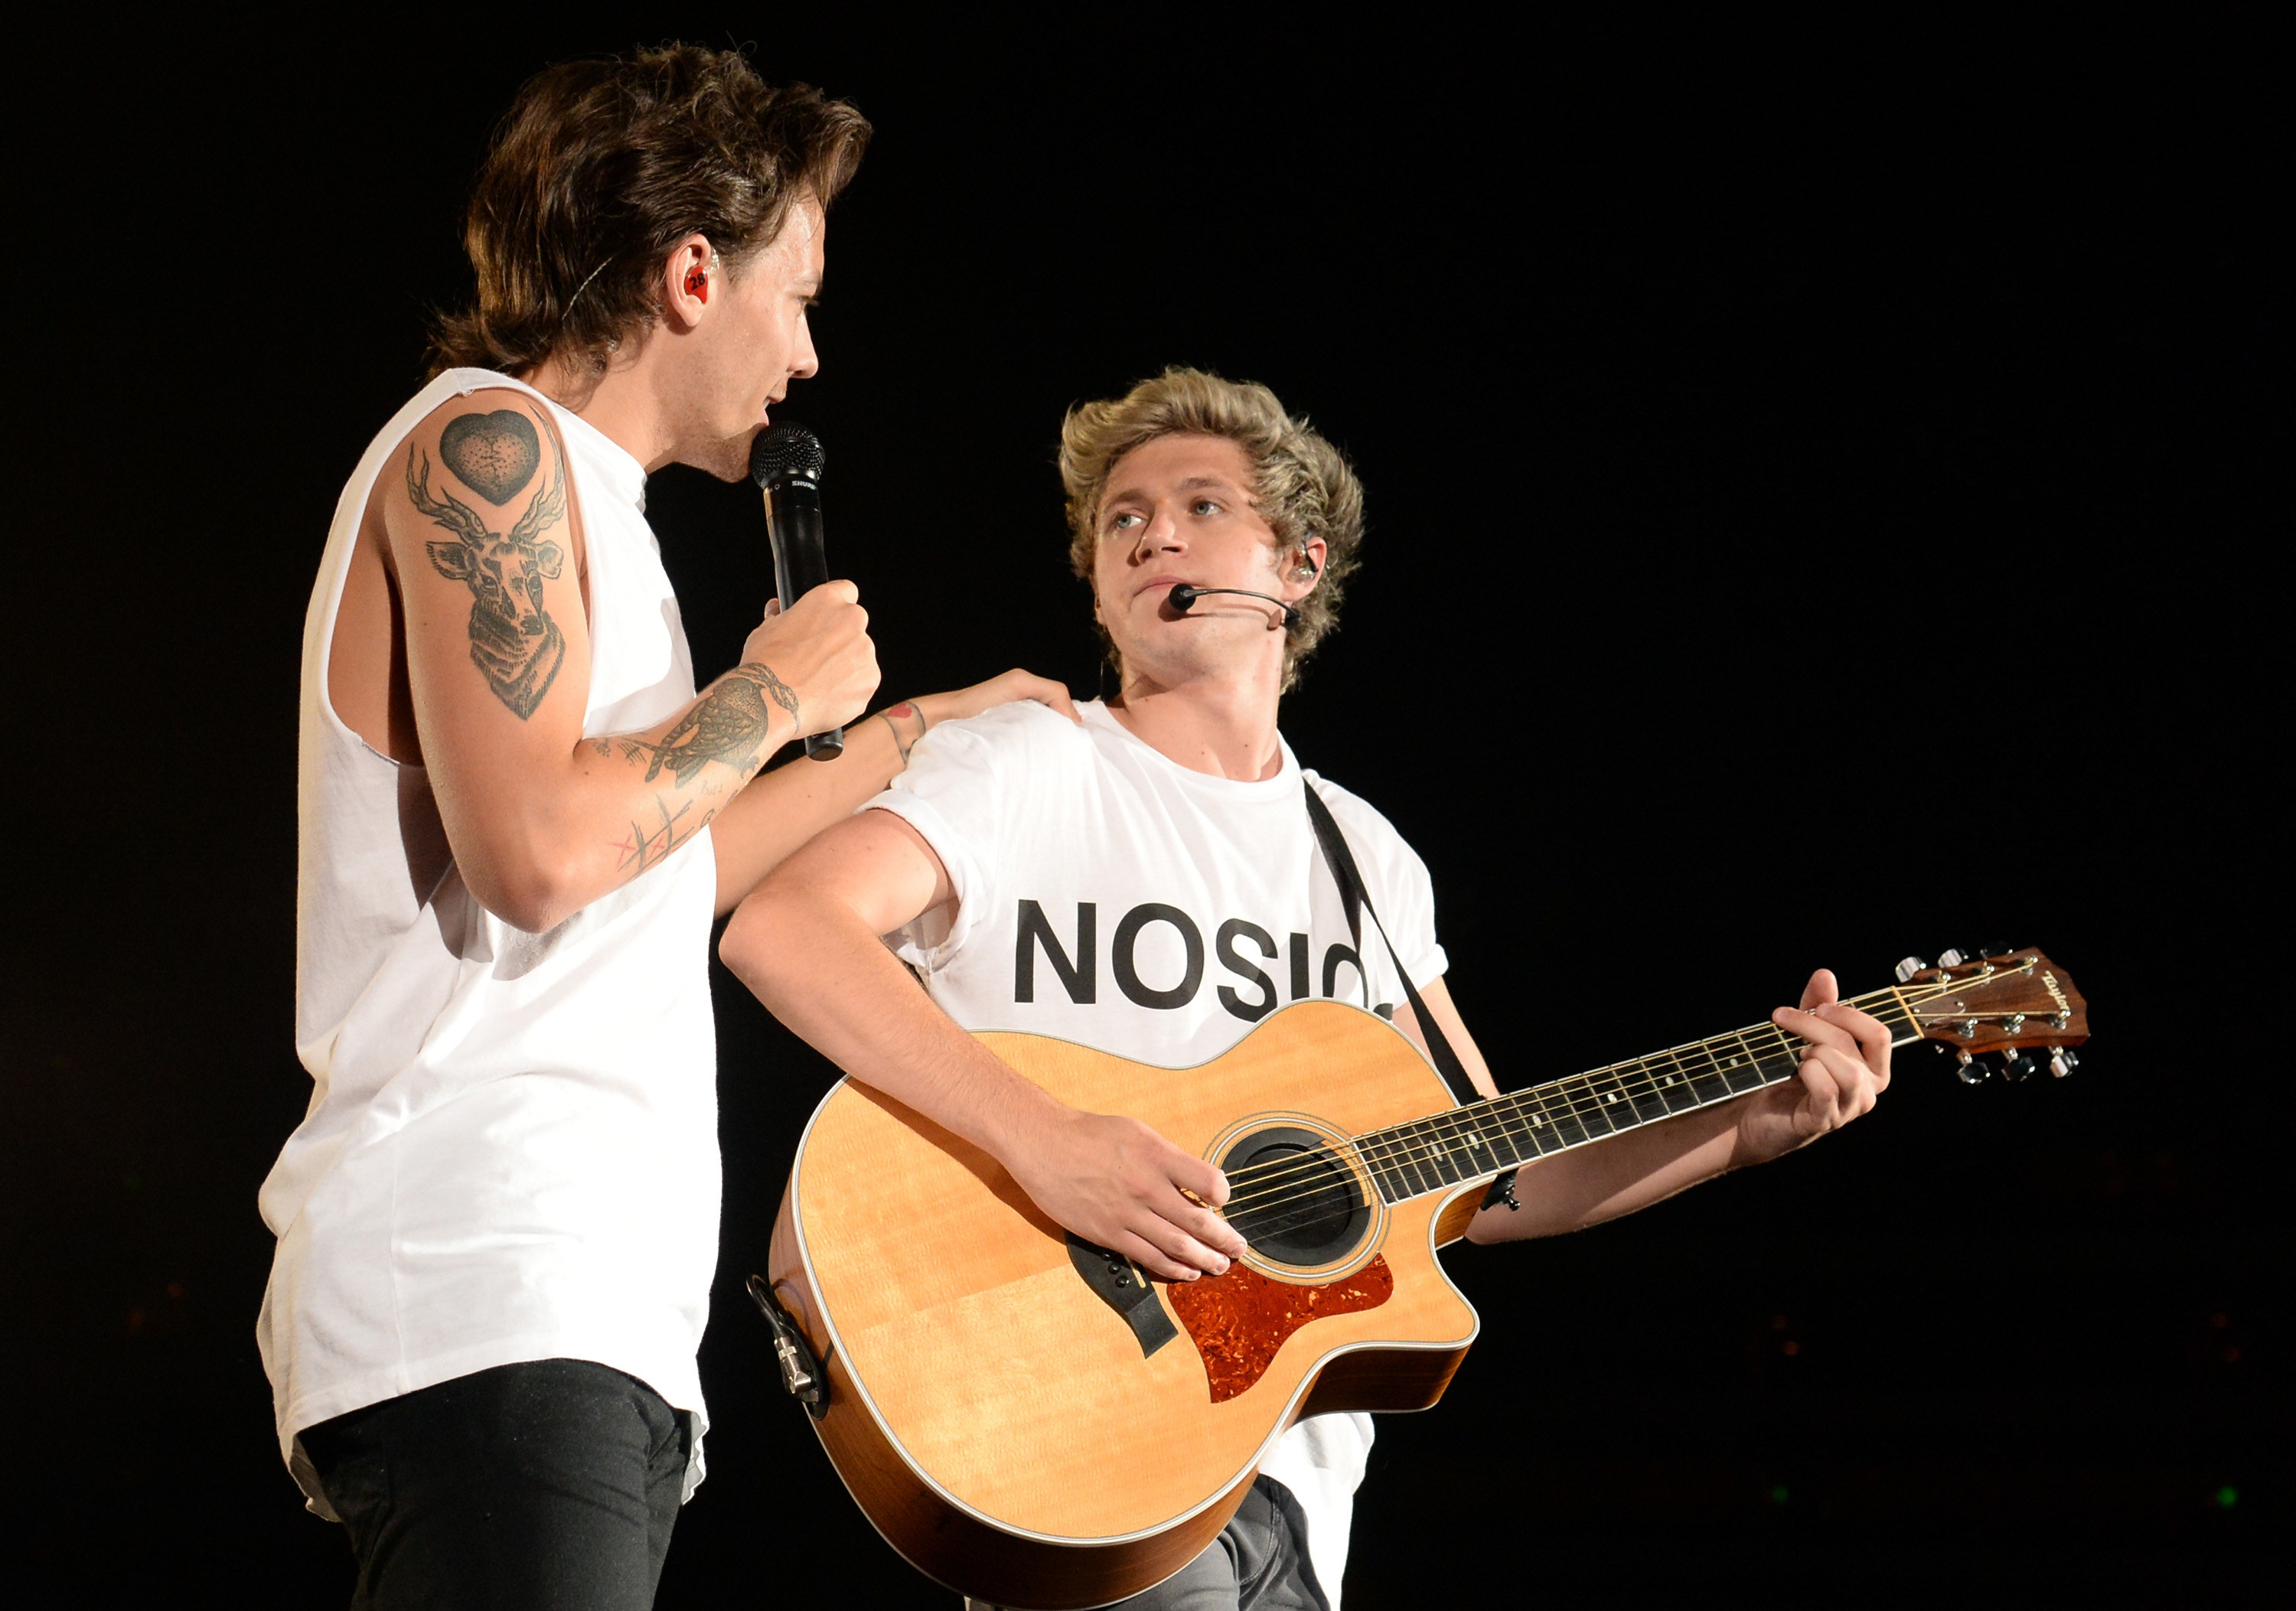 Louis Tomlinson Gets Real About Harry Styles' Solo Success: 'It Did Bother  Me At First